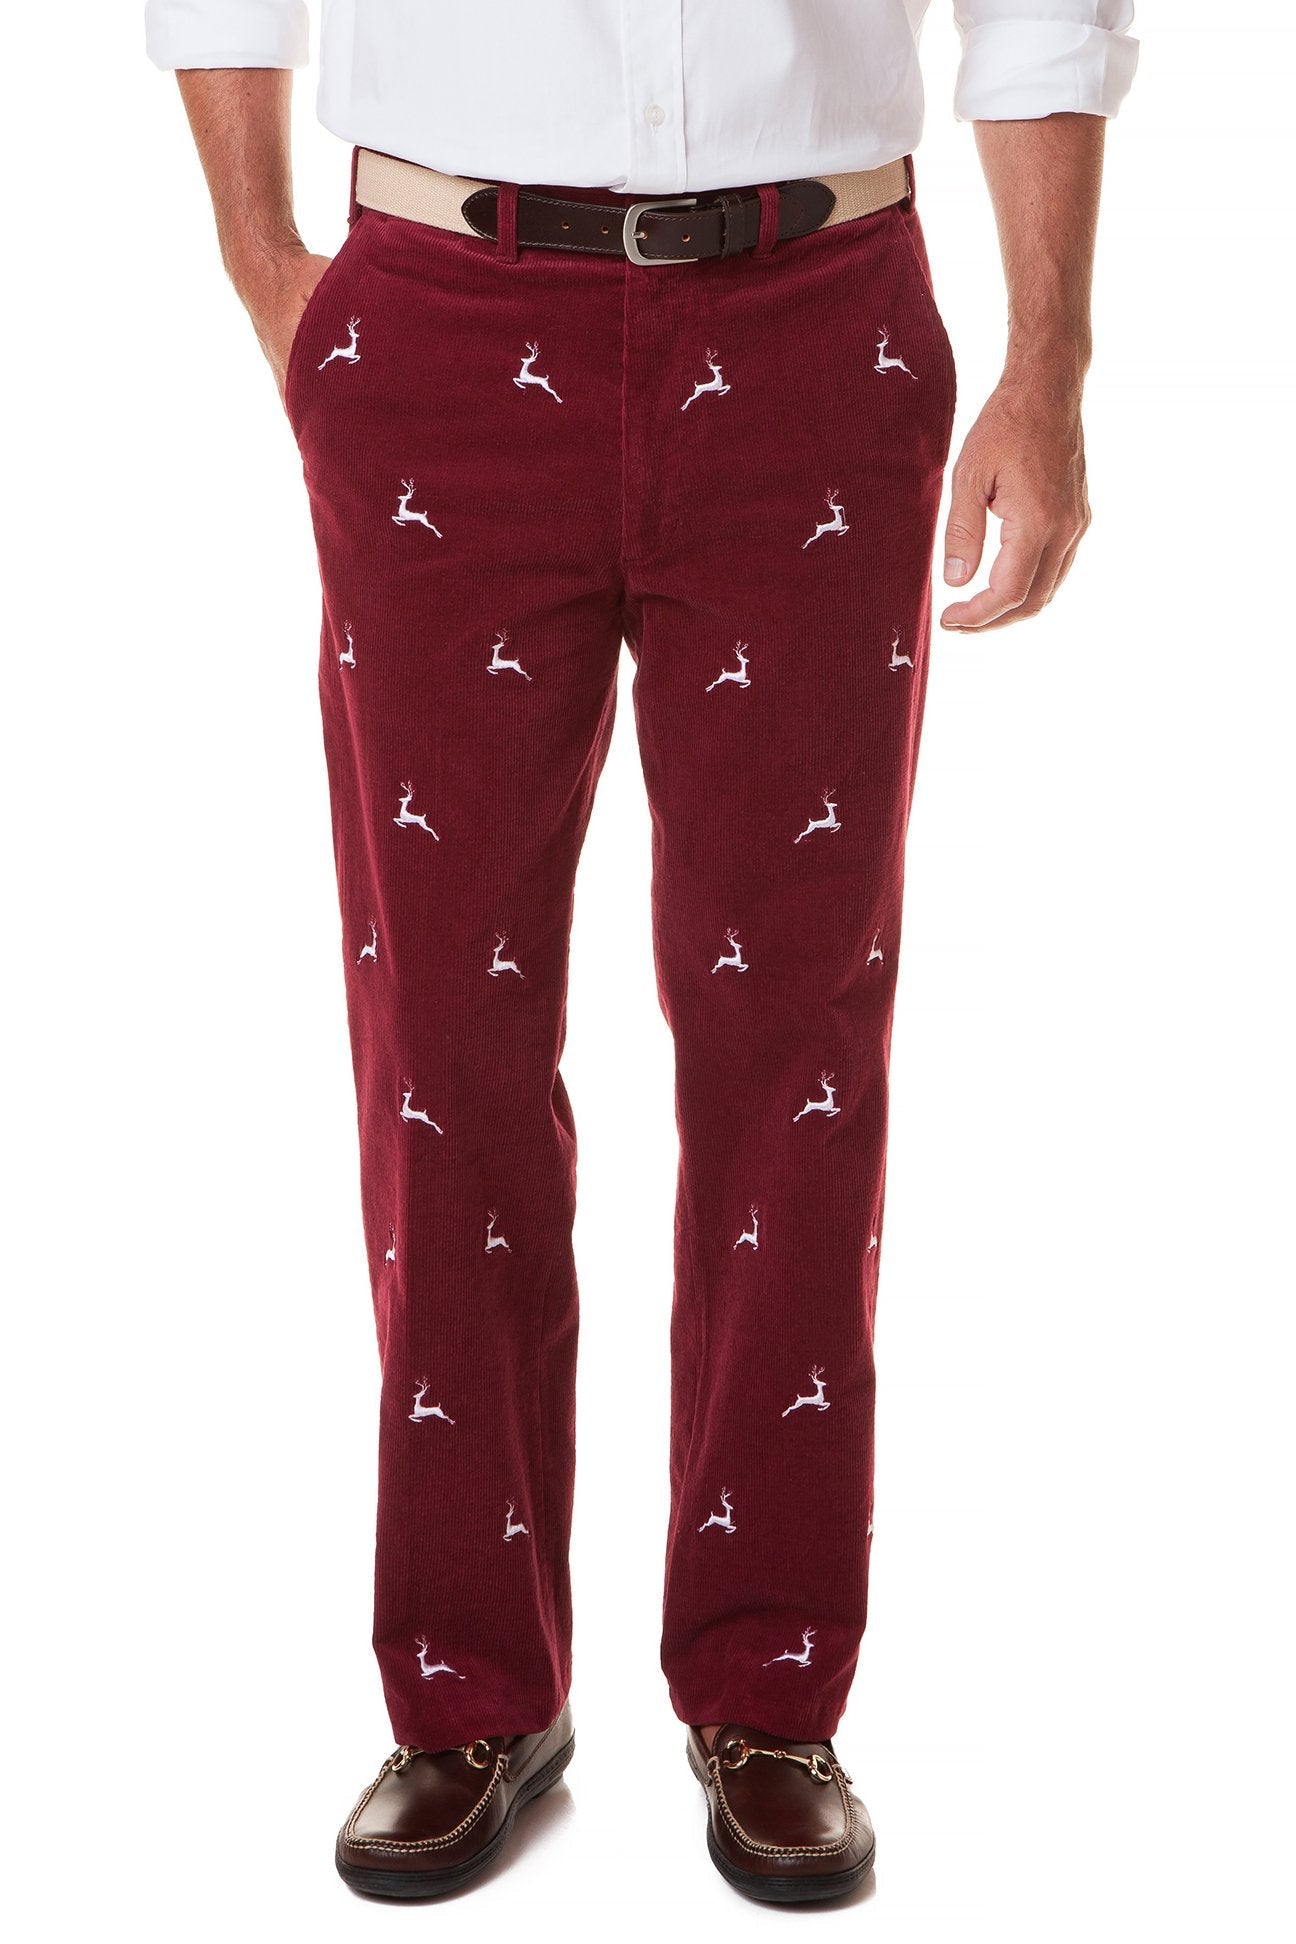 Beachcomber Stretch Corduroy Pant Merlot with Leaping Reindeer